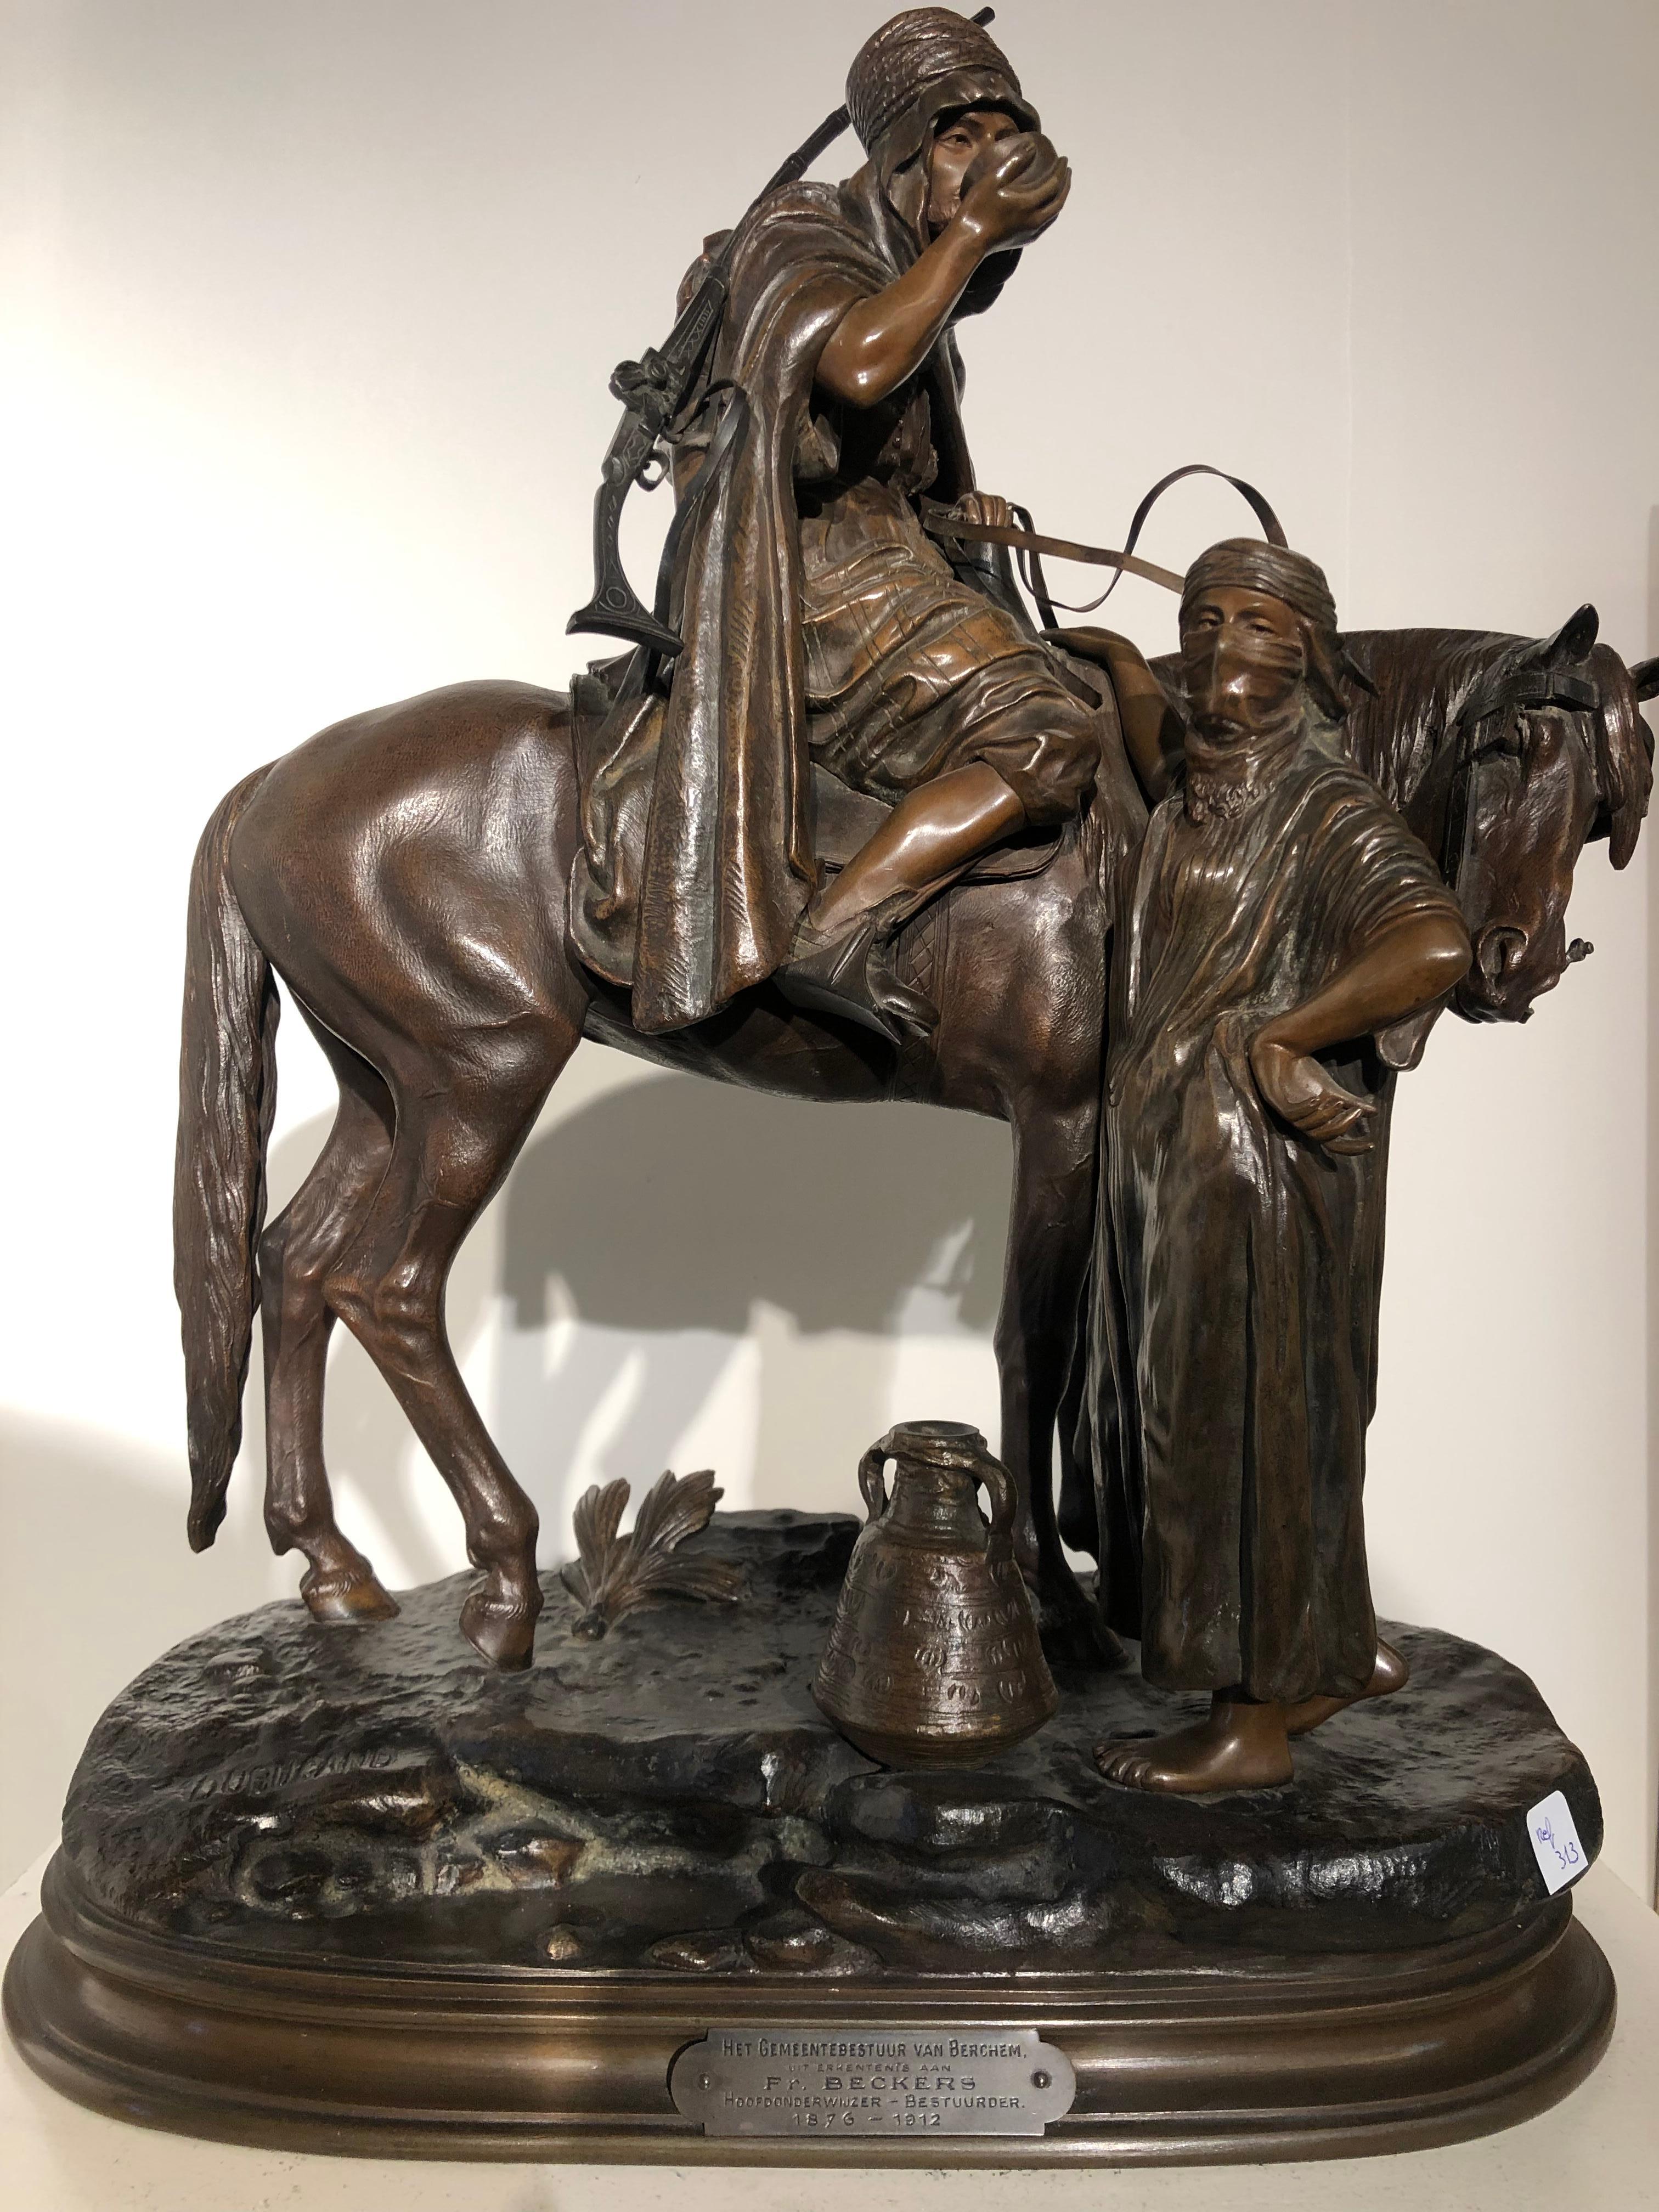 Very beautiful and very attractive subject of a woman giving water to a Arab horseman .
Very high quality of foundry with some numbers and letters at the back of the sculpture.
The bronze is signed on the terrasse by Alfred Dubucand.
Famous for